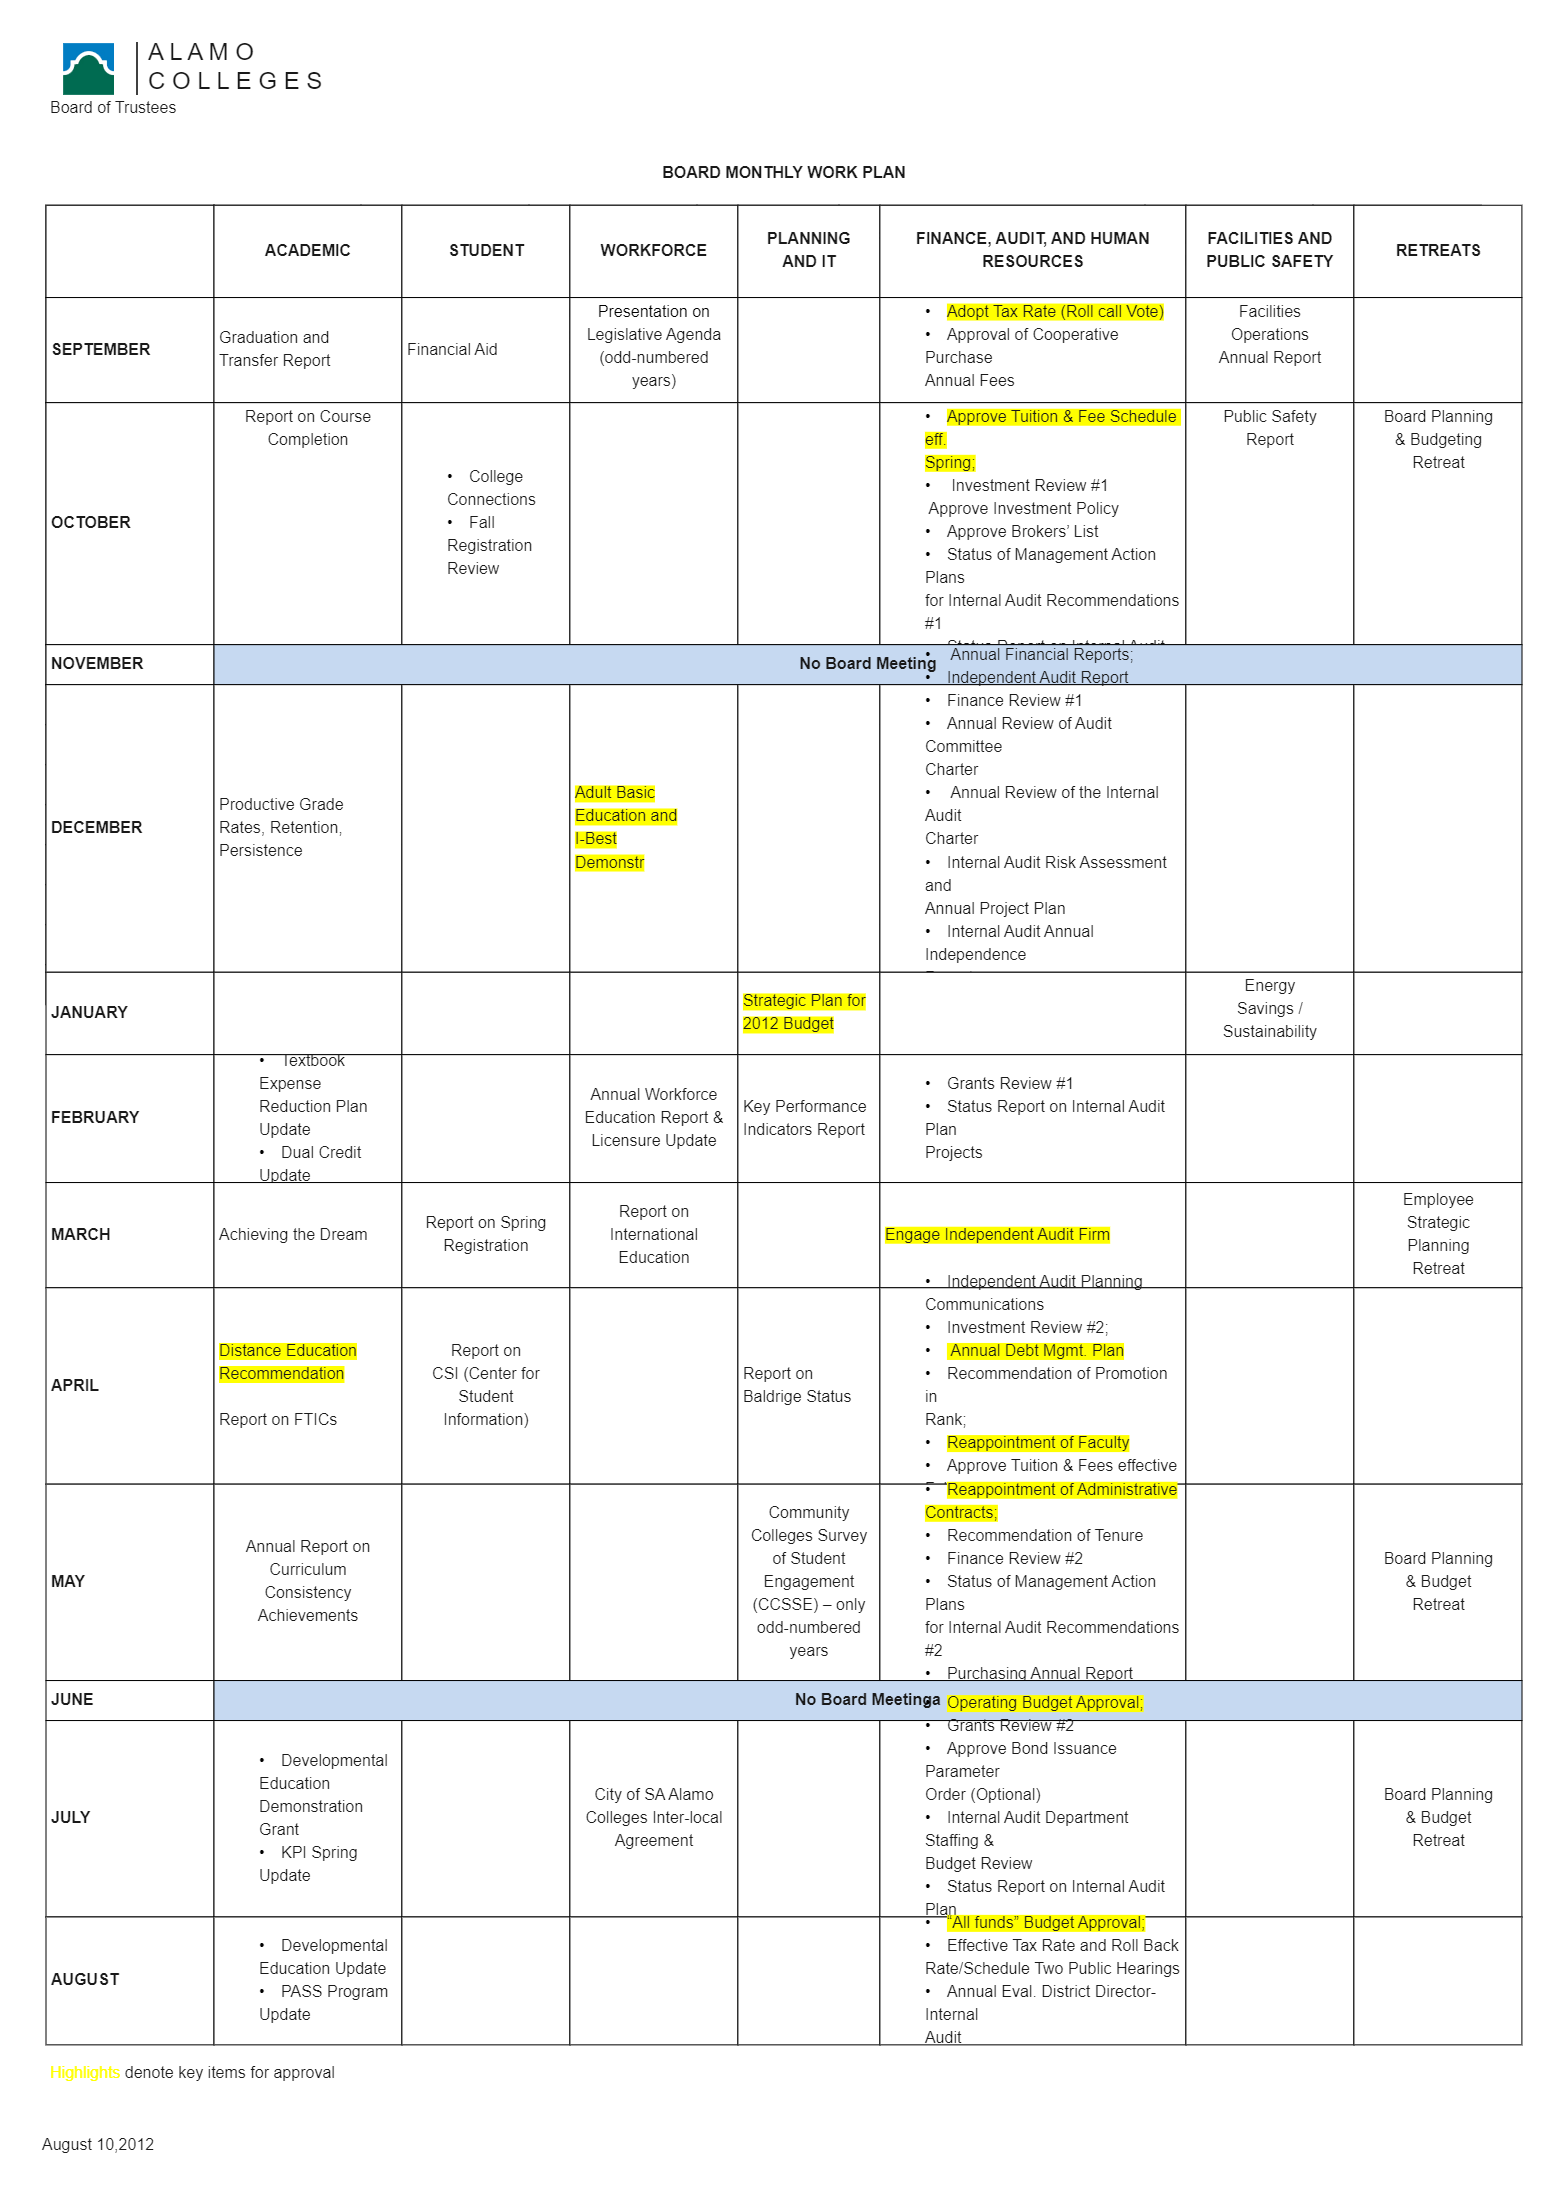 Work Plan Examples And Resources